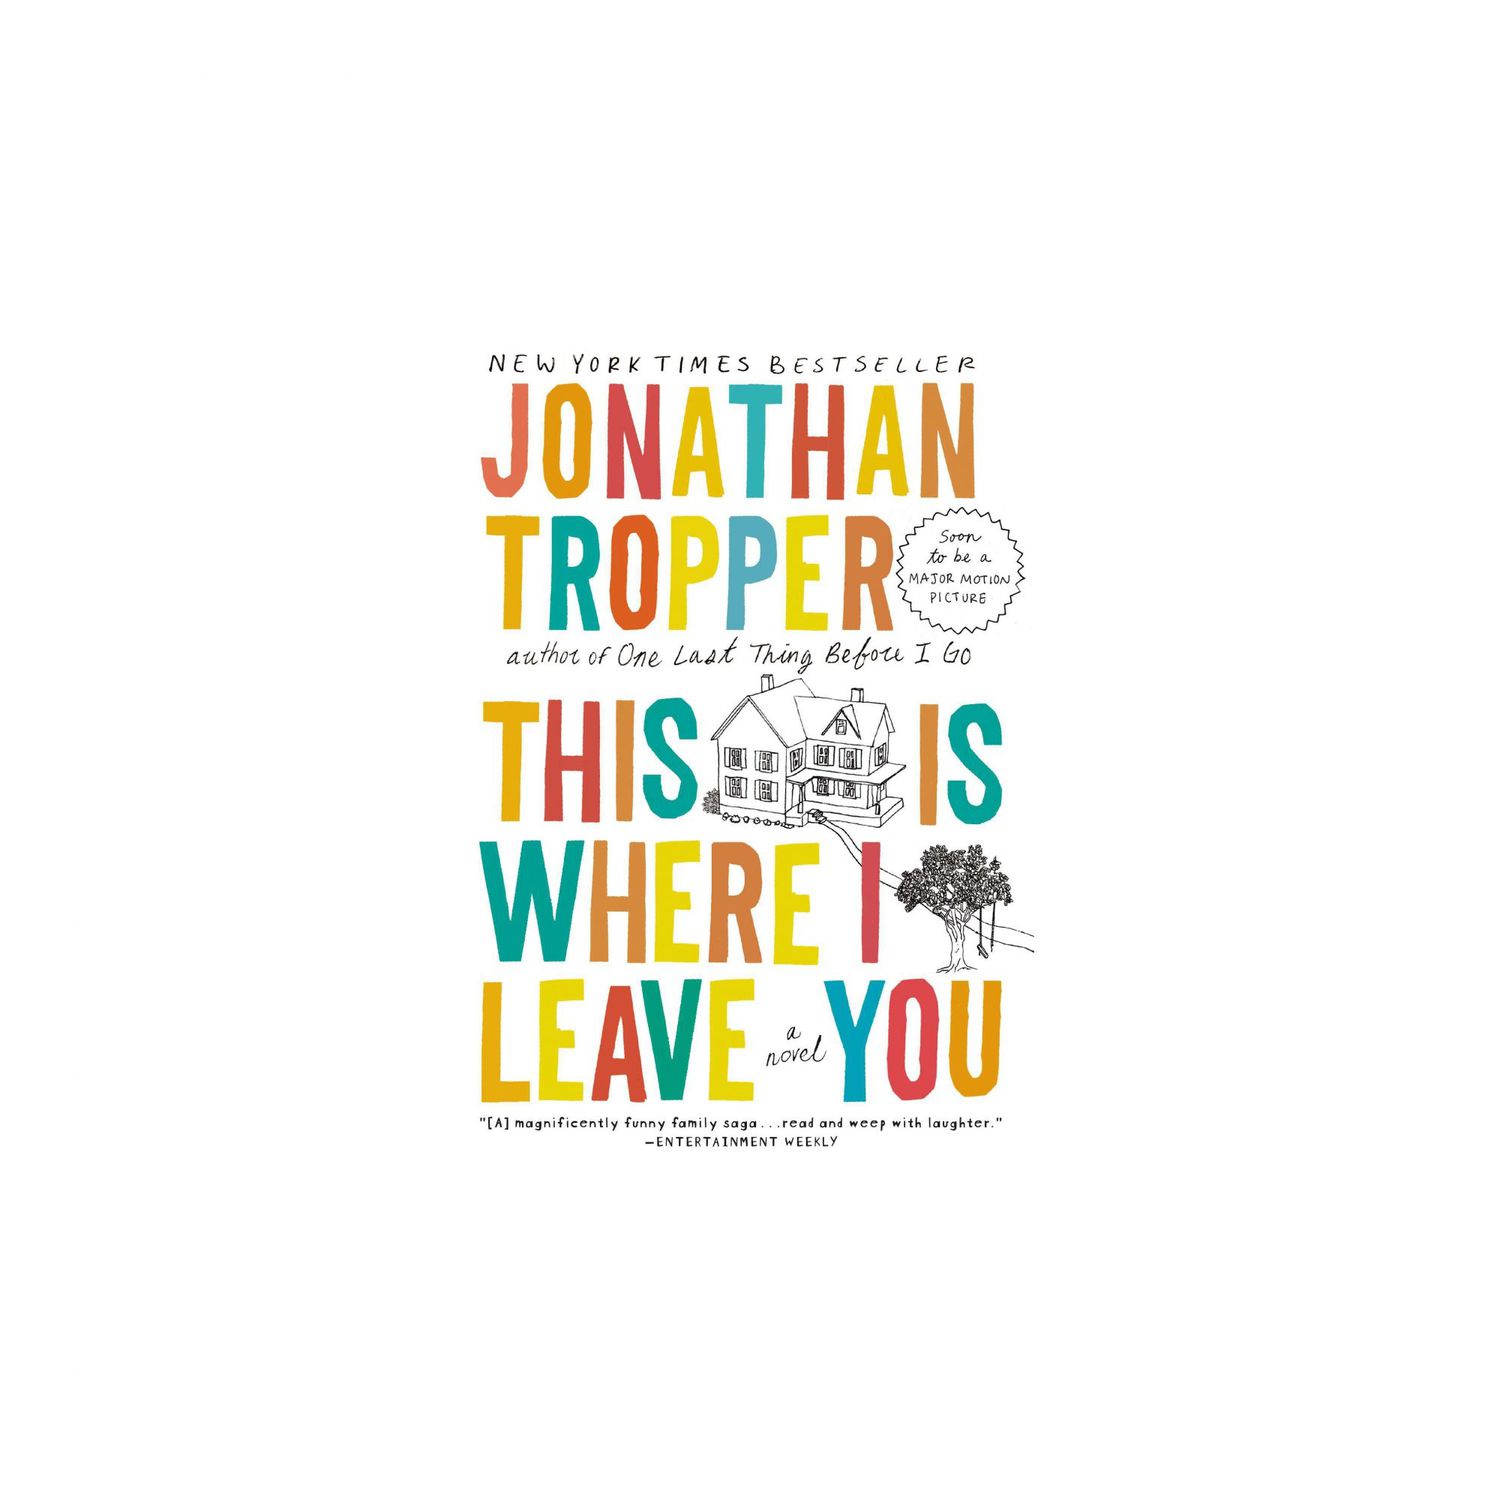 This Is Where I Leave You, by Jonathan Tropper